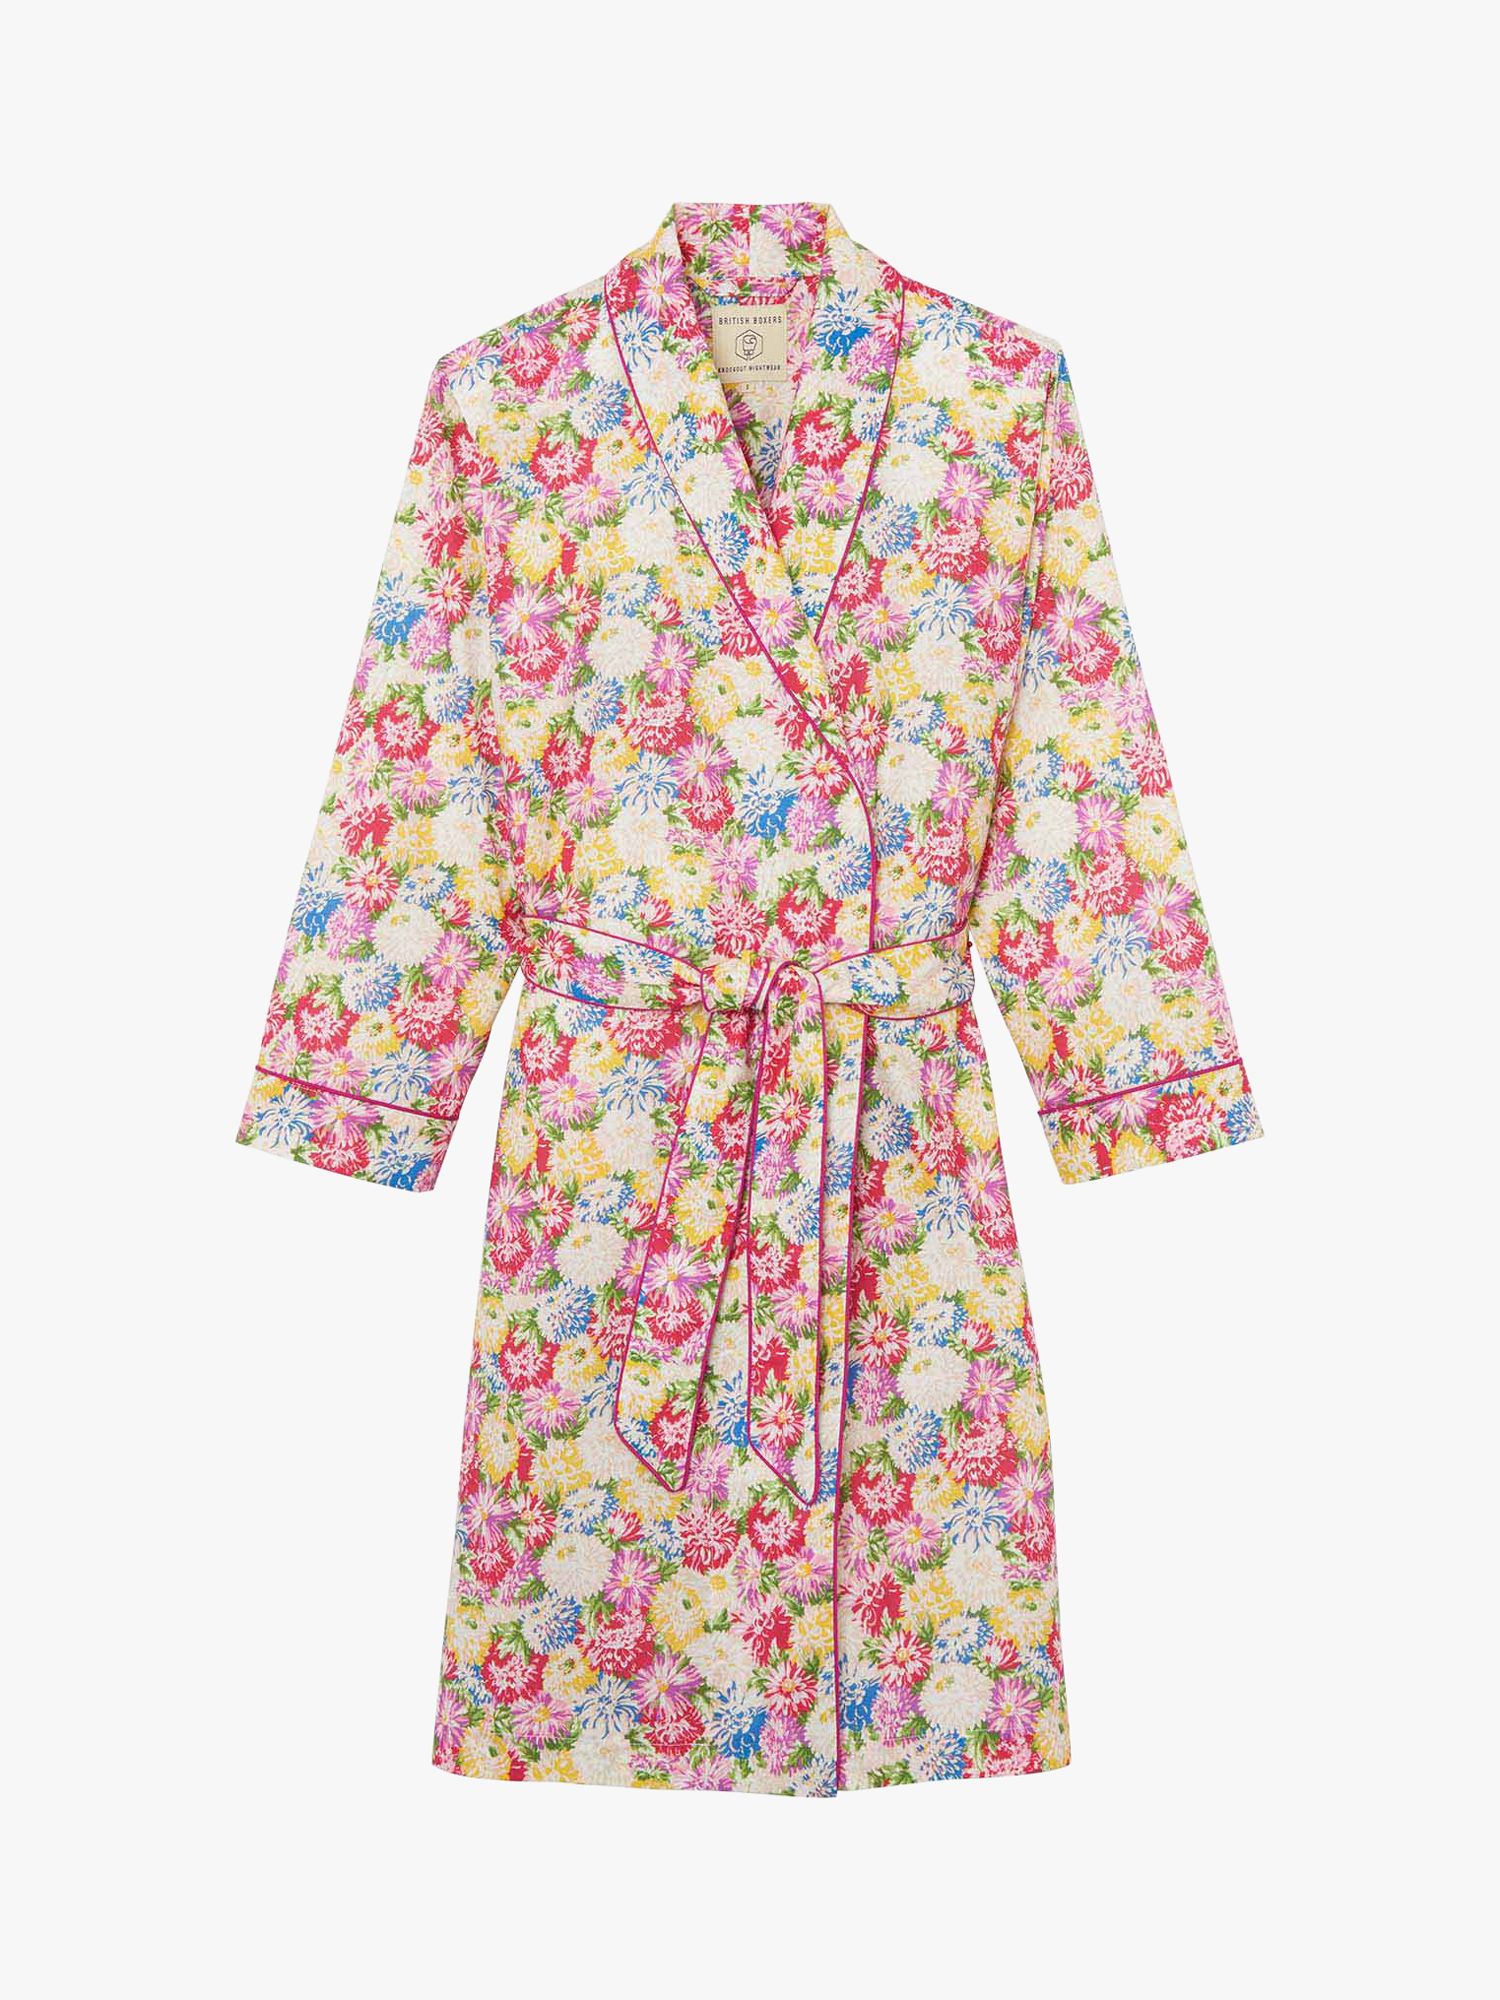 British Boxers Flower Bed Print Cotton Dressing Gown, Multi, S